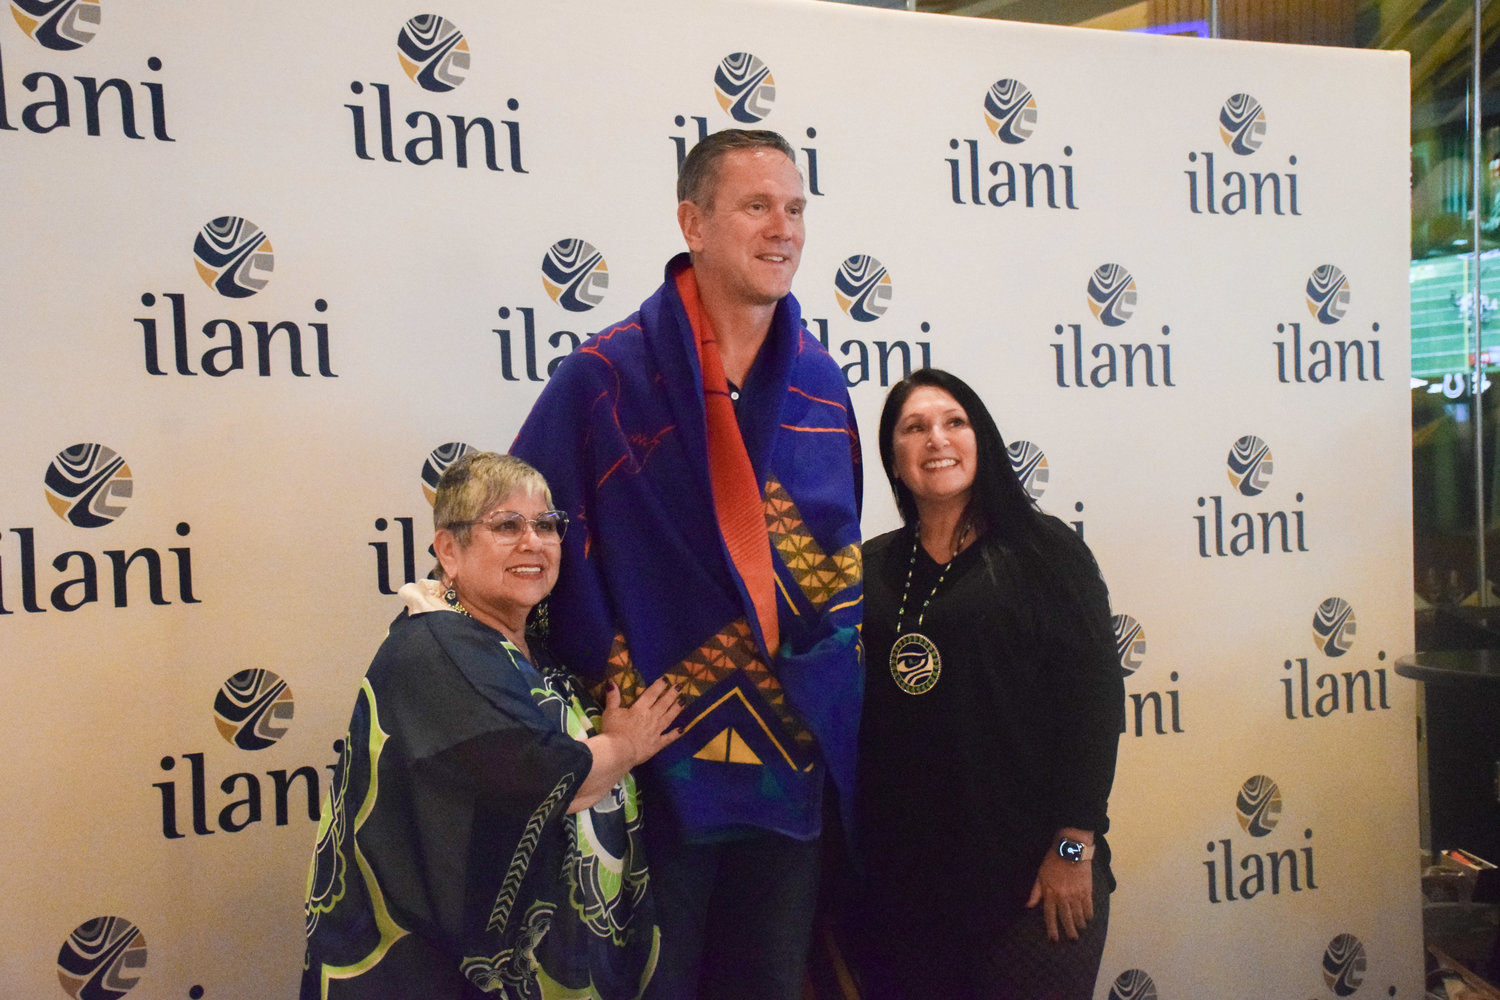 Former NFL quarterback and Washington State University alum Drew Bledsoe receives a Cowlitz Indian Tribe blanket from tribal general council chair Patty Kinswa-Gaiser, left, and council member Suzanne Donaldson during a grand opening for sports betting on Nov. 6.